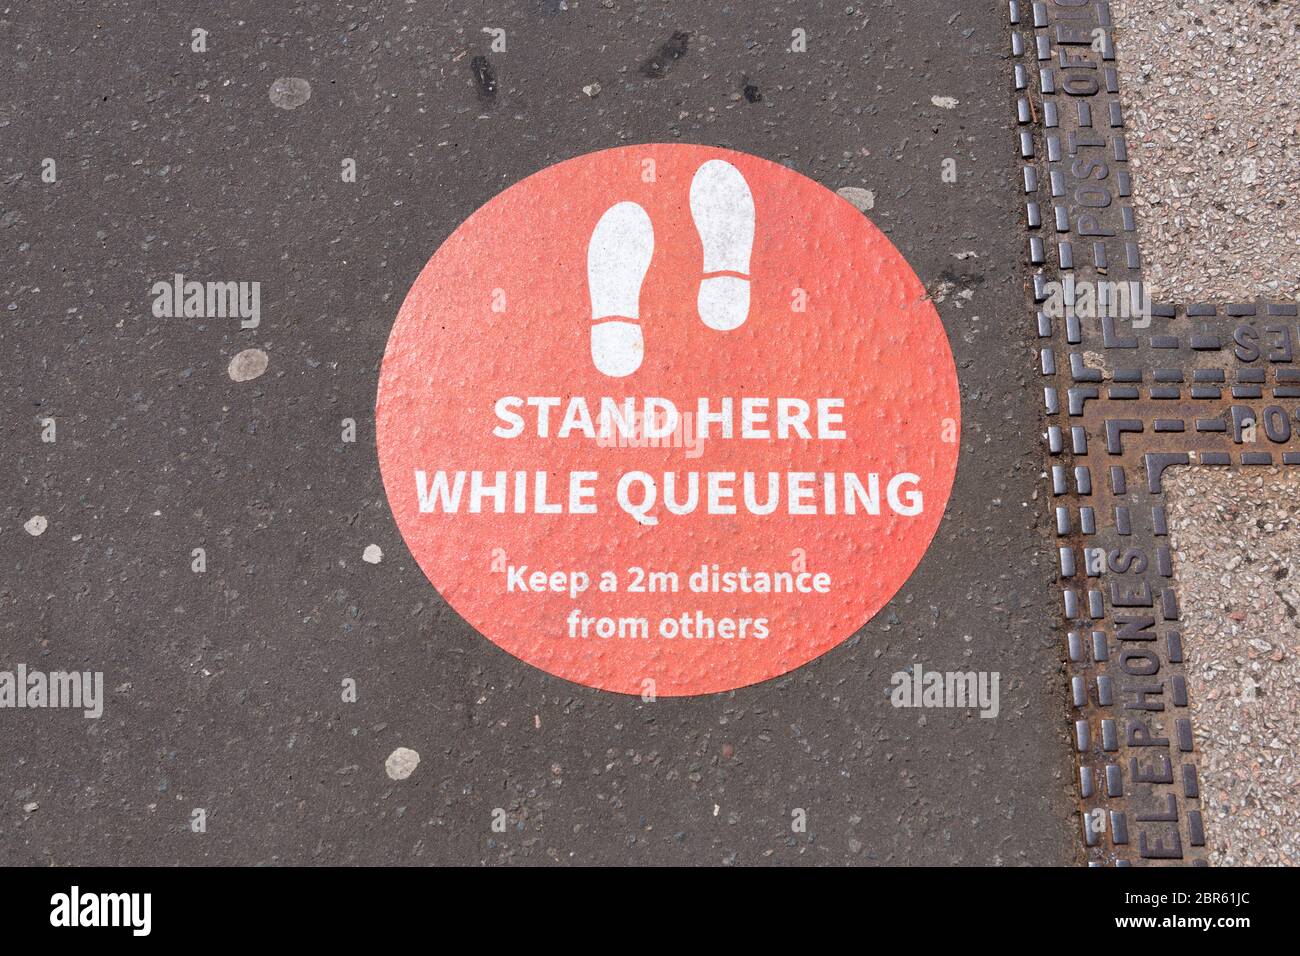 Social distancing queue sign - stand here while queueing' sign on pavement during coronavirus pandemic - UK Stock Photo